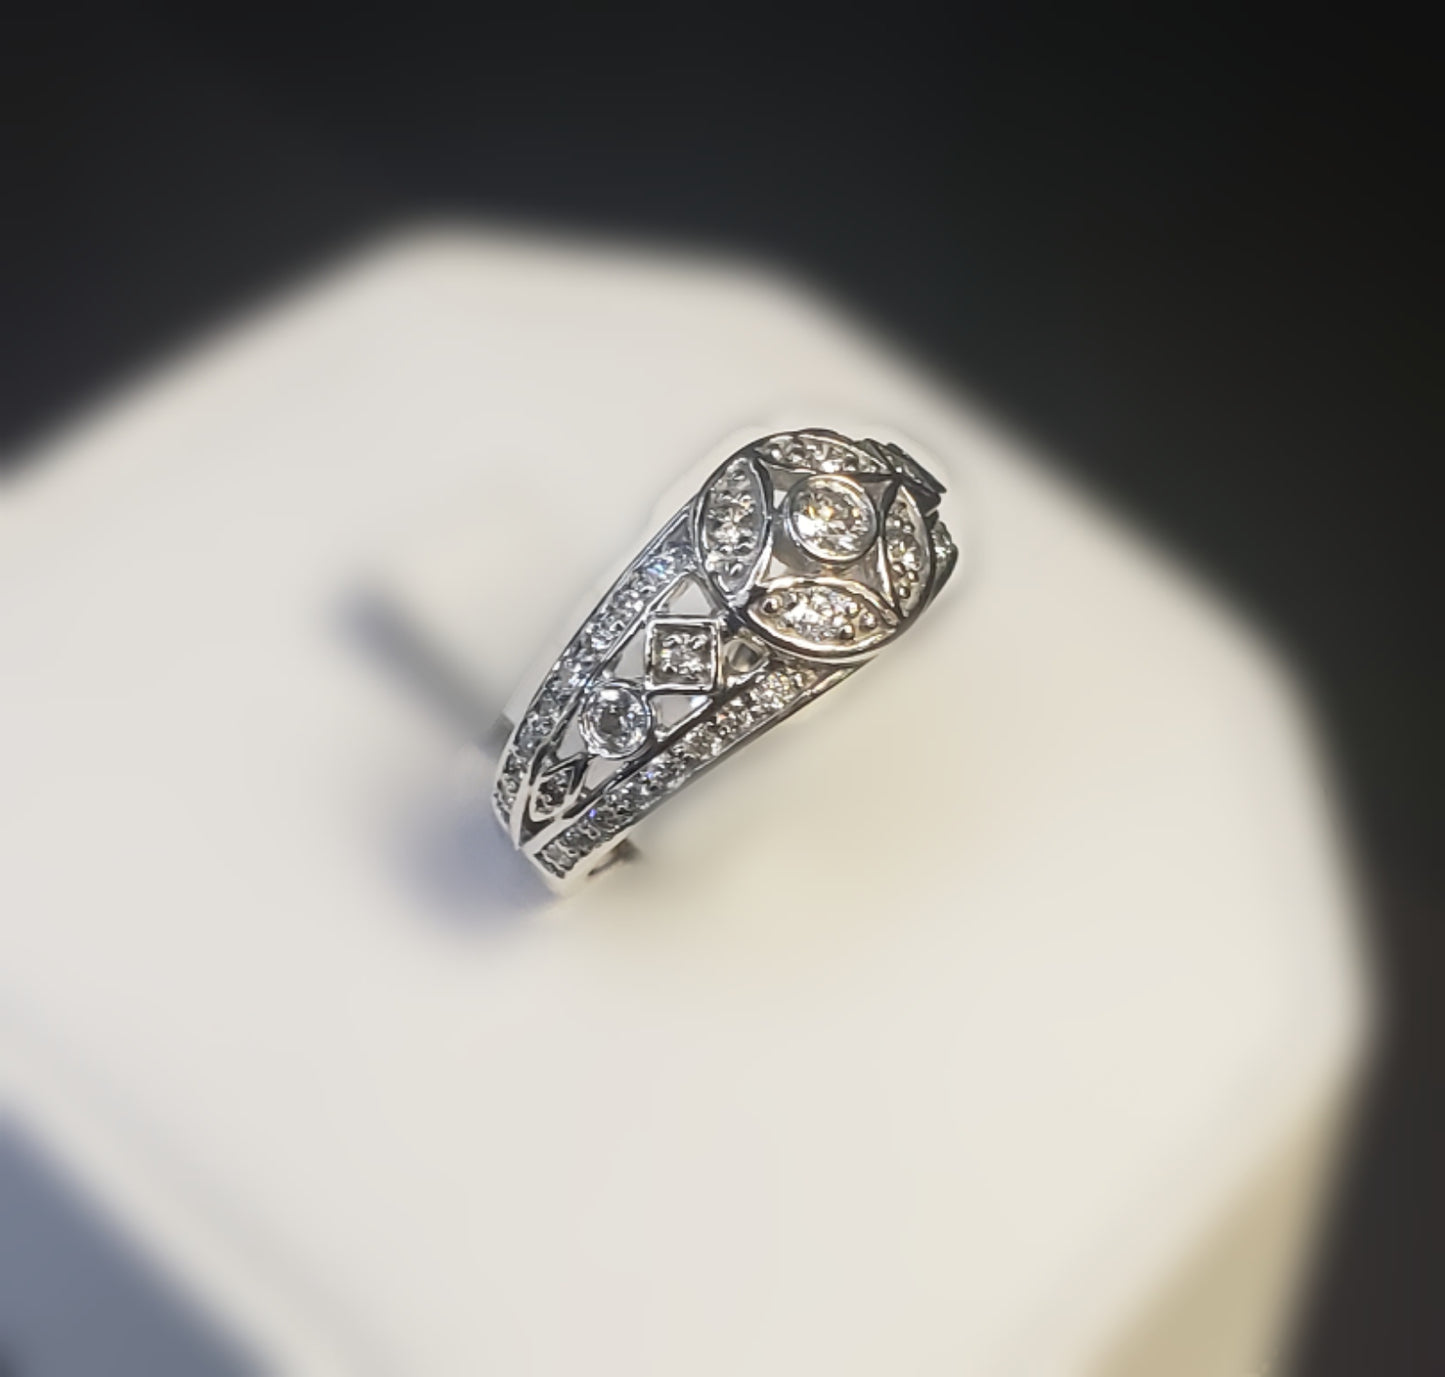 14Kt White Gold and Diamond Ring #Nr7